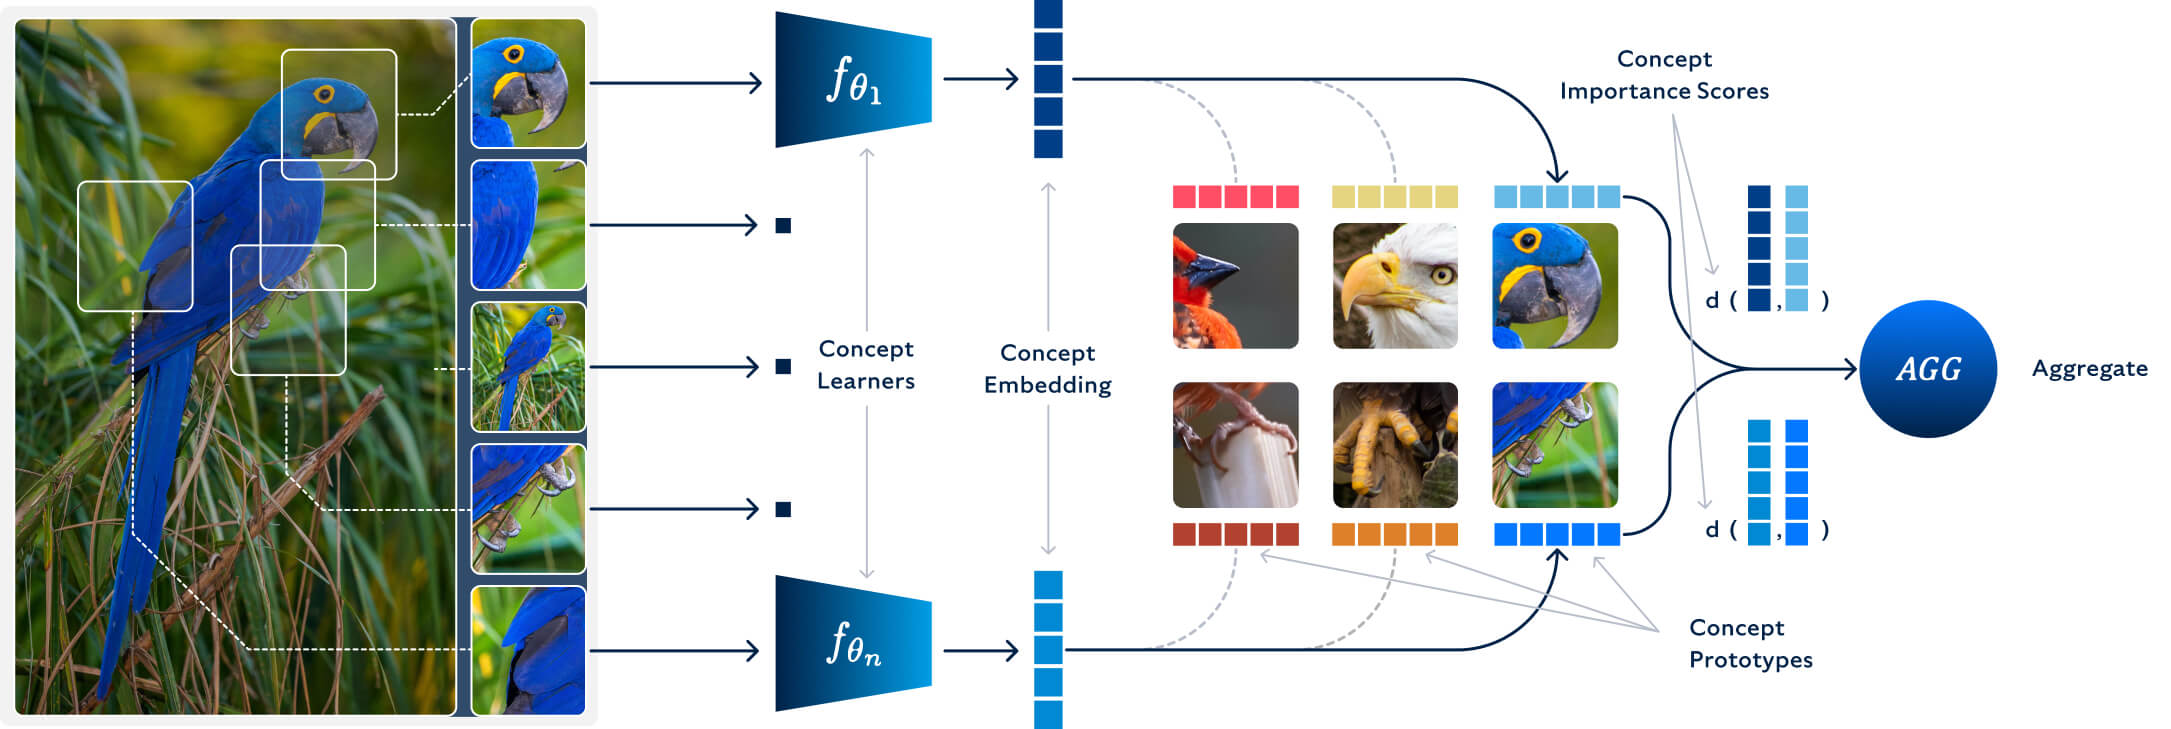 How an AI analyses an image and determines whether it contains a bird